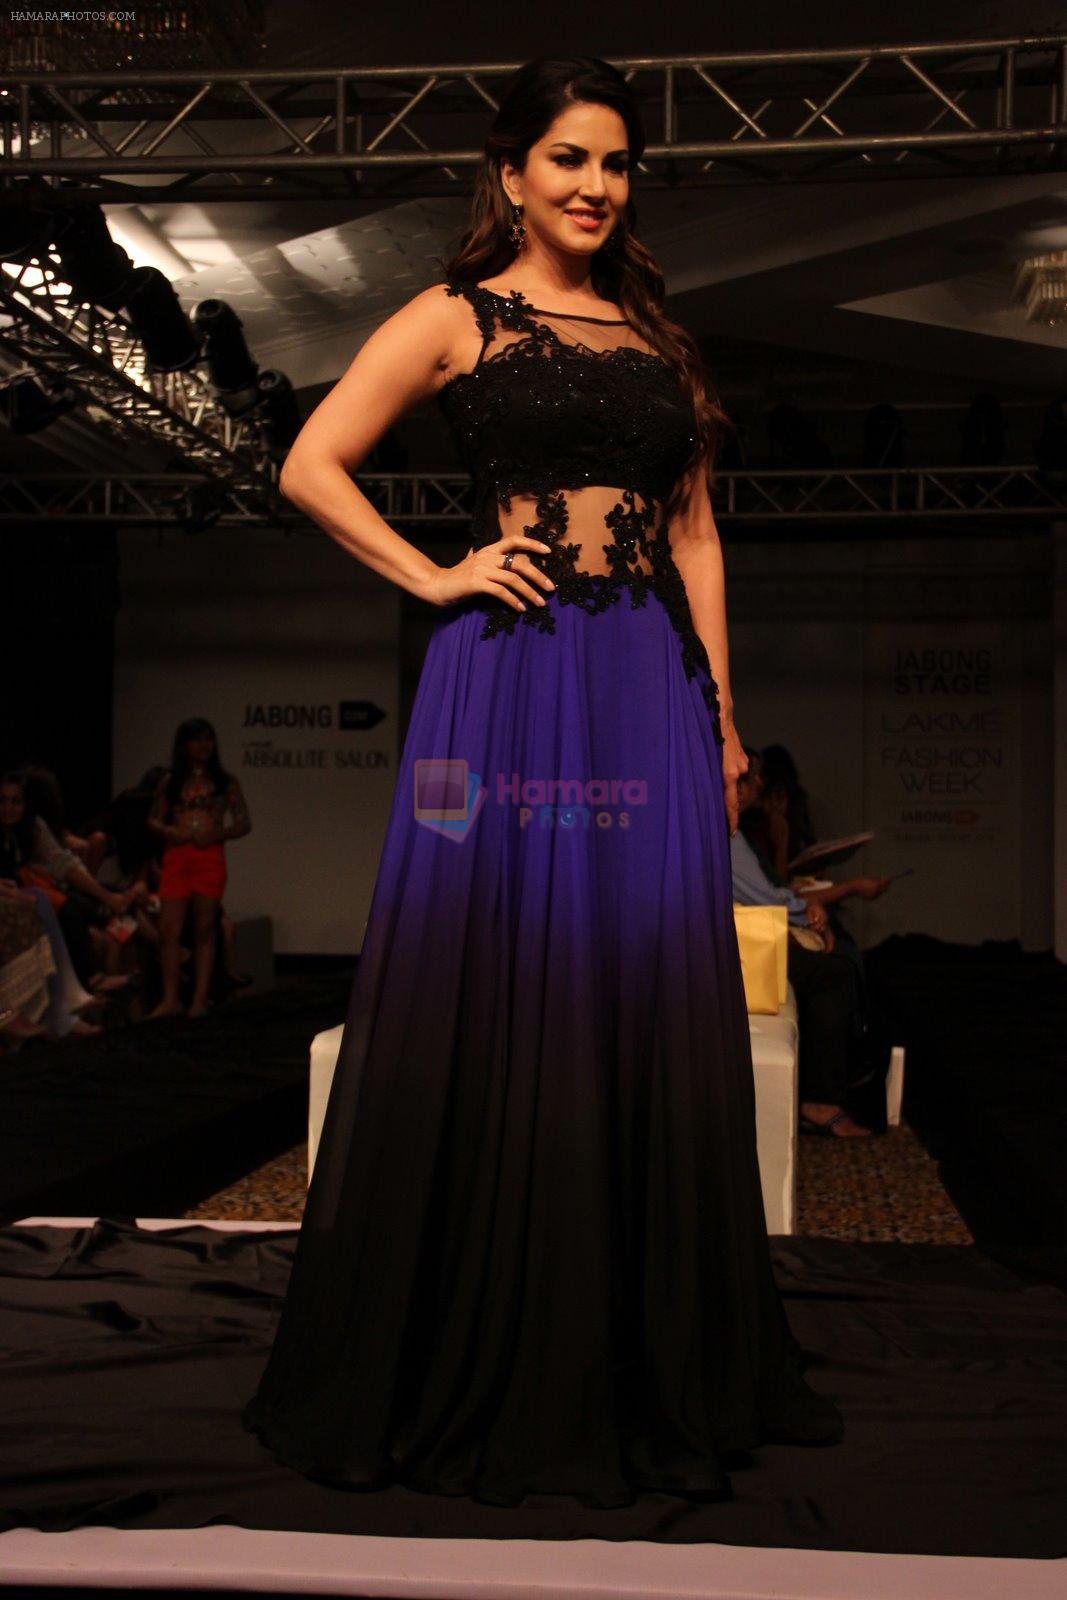 Sunny Leone at RRISO Show at Lakme Fashion Week 2015 Day 5 on 22nd March 2015